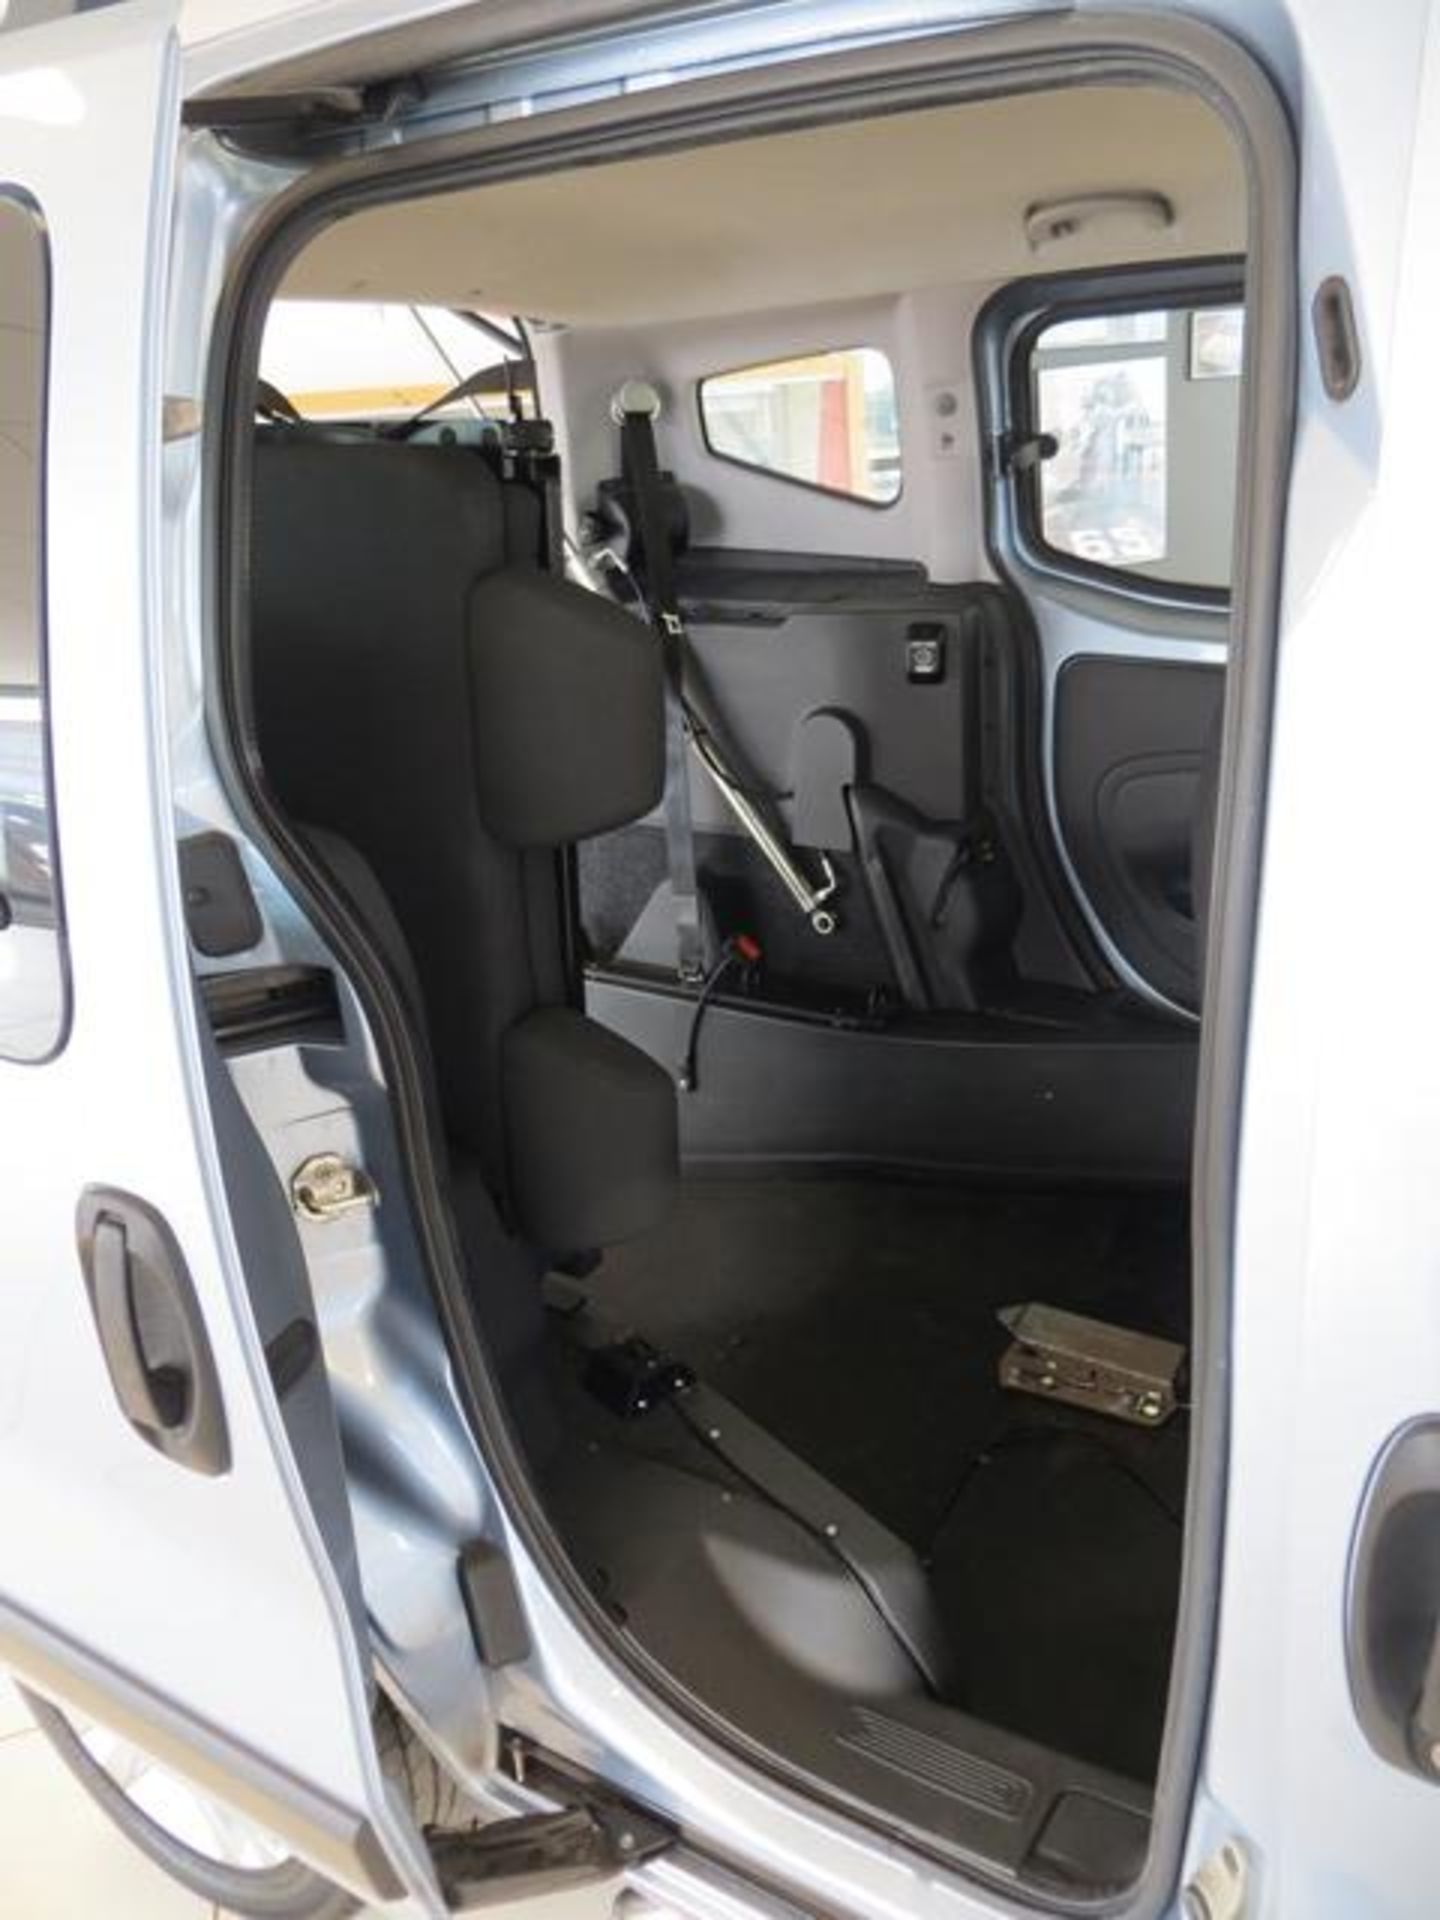 Fiat Qubo with Sirus drive / passenger from wheel chair conversion Dynamic Multijet diesel auto - Image 7 of 11